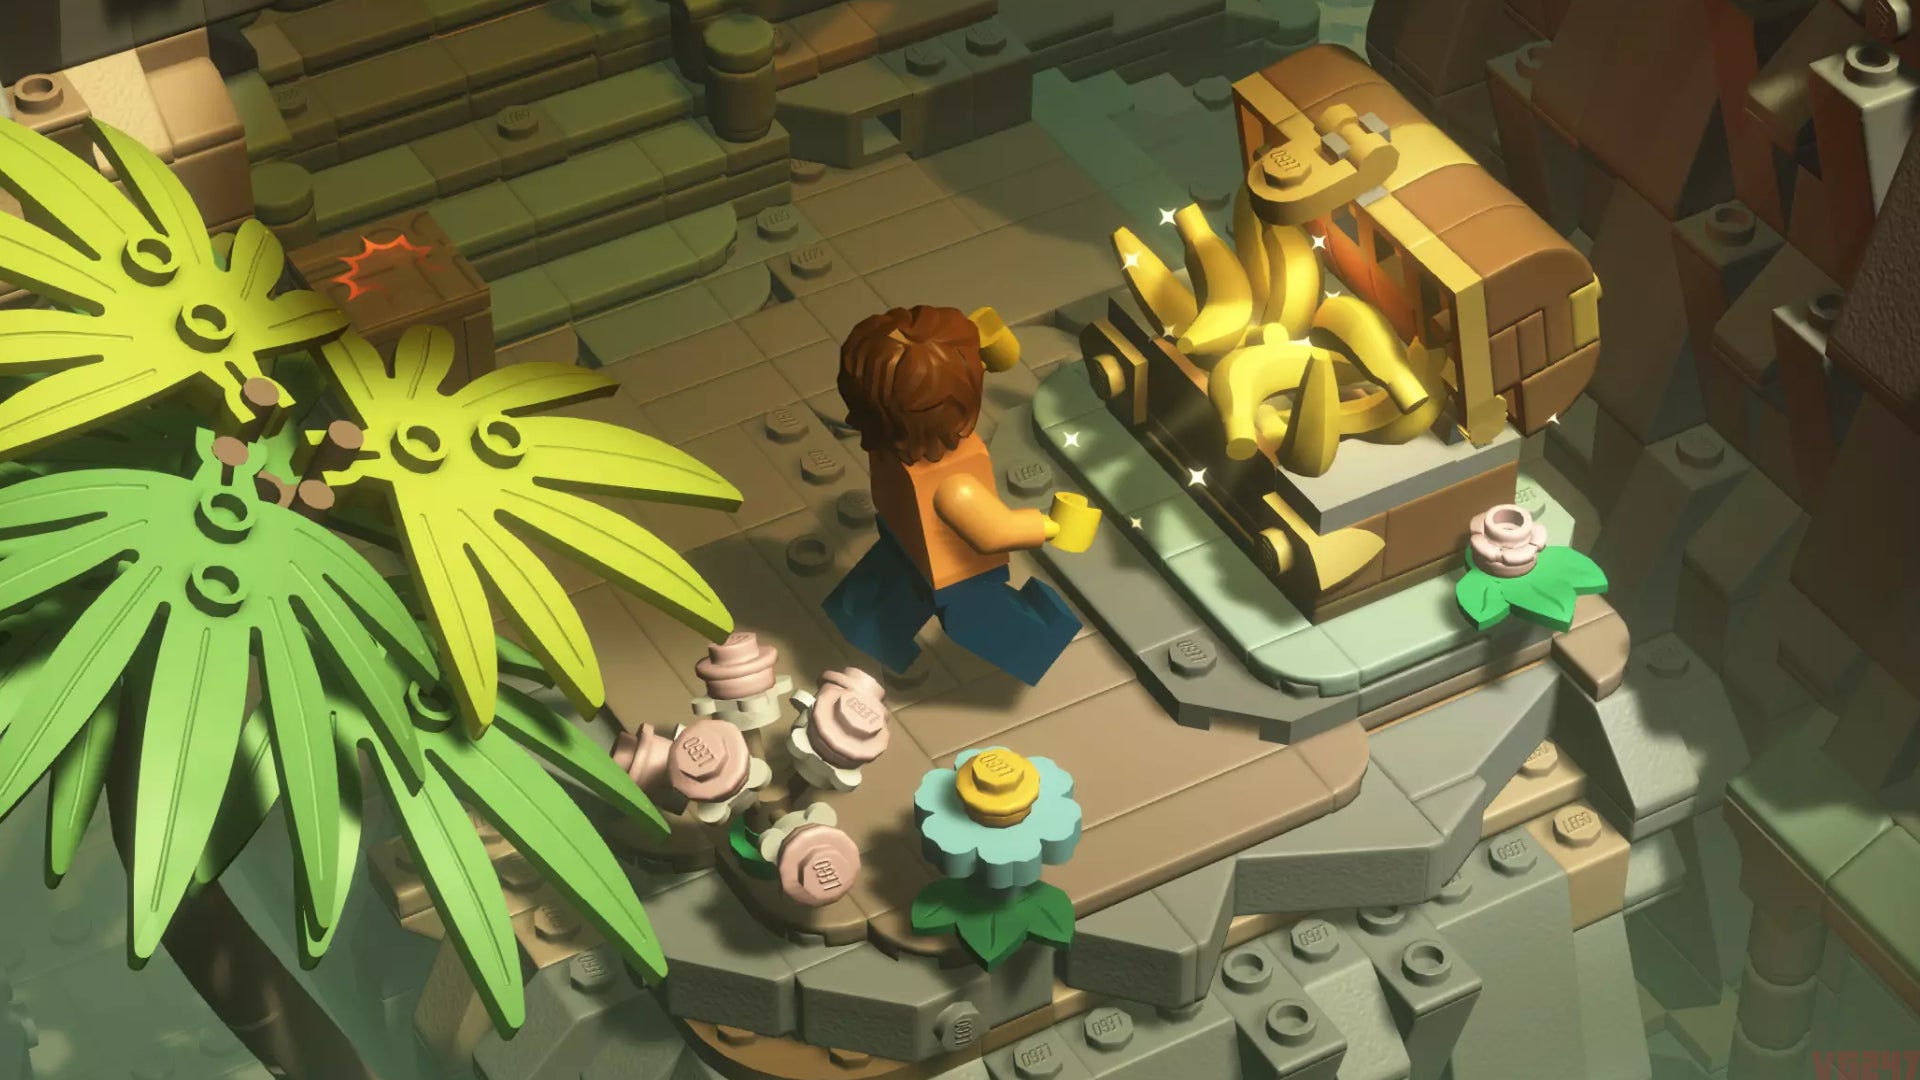 Lego Bricktales review: A near-perfect video game representation of joyous  Lego creativity | VG247